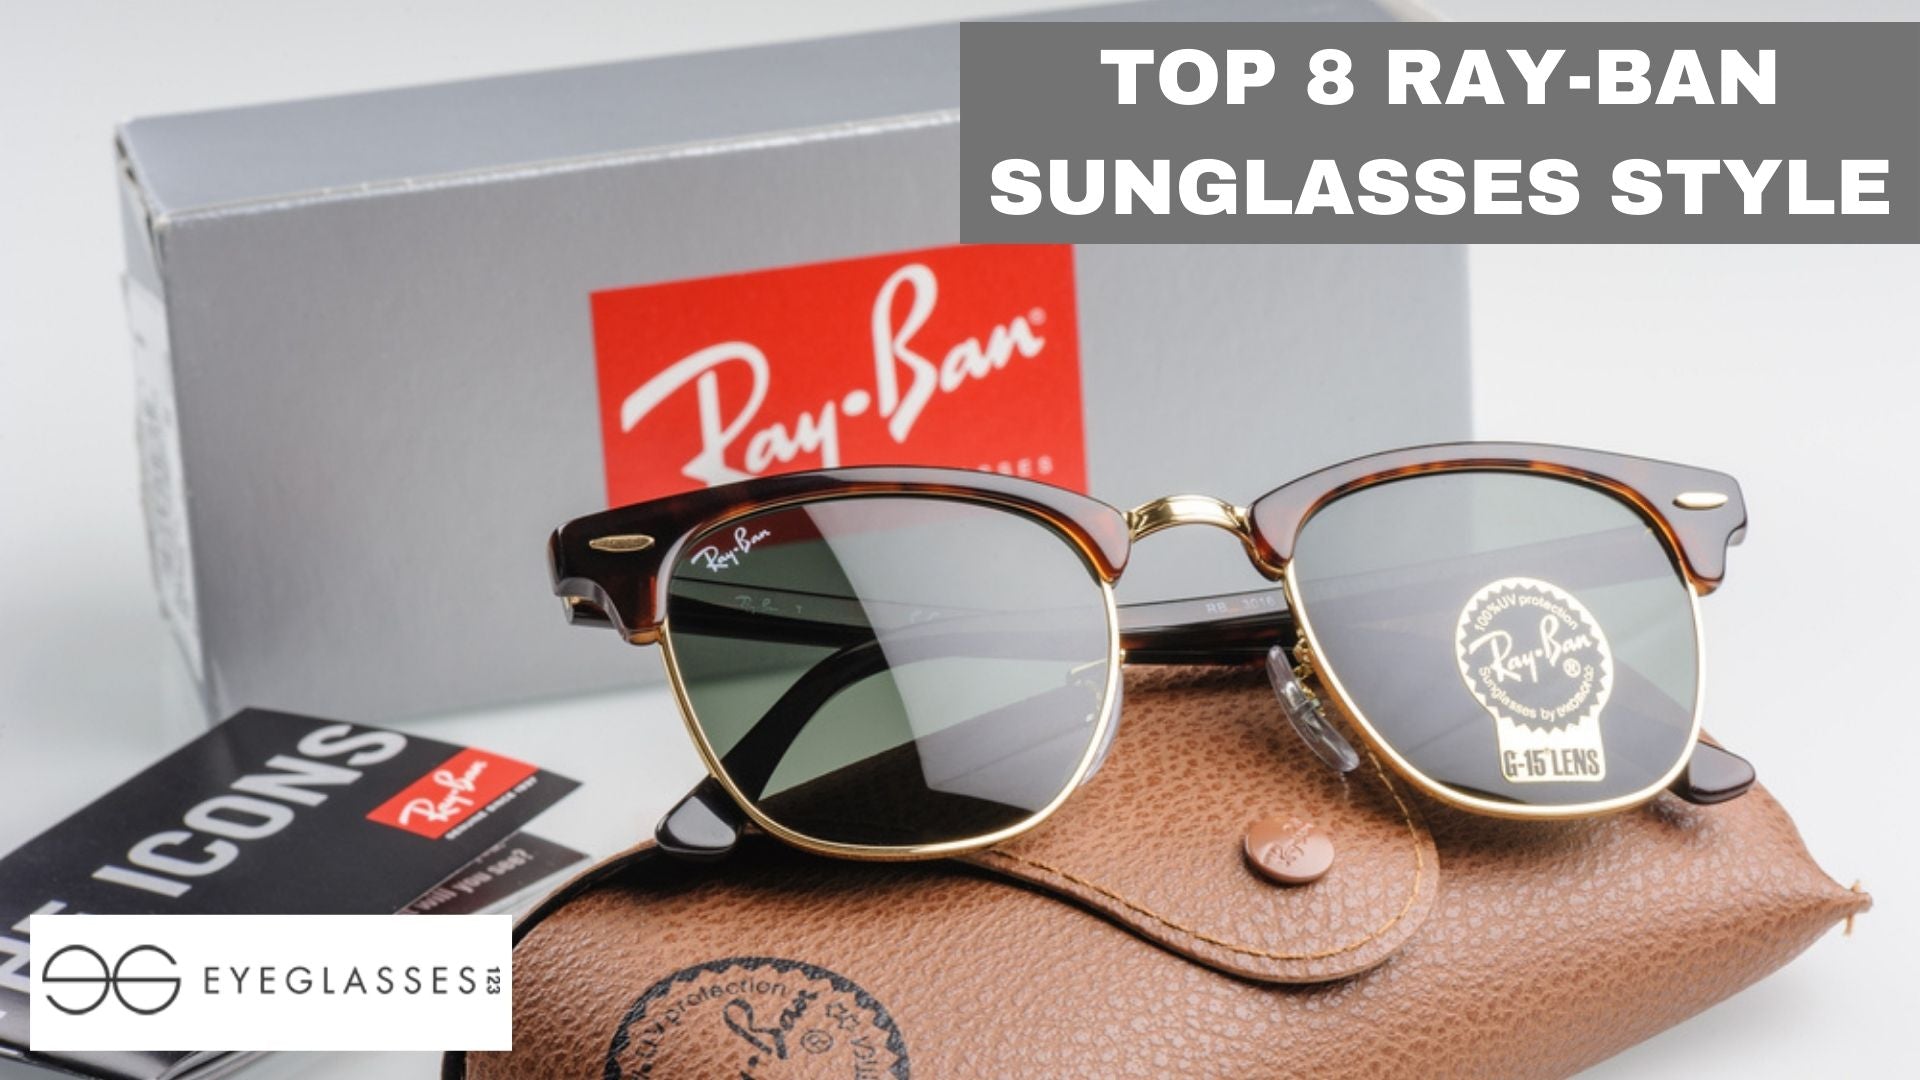 TOP 8 RAY-BAN SUNGLASSES STYLE